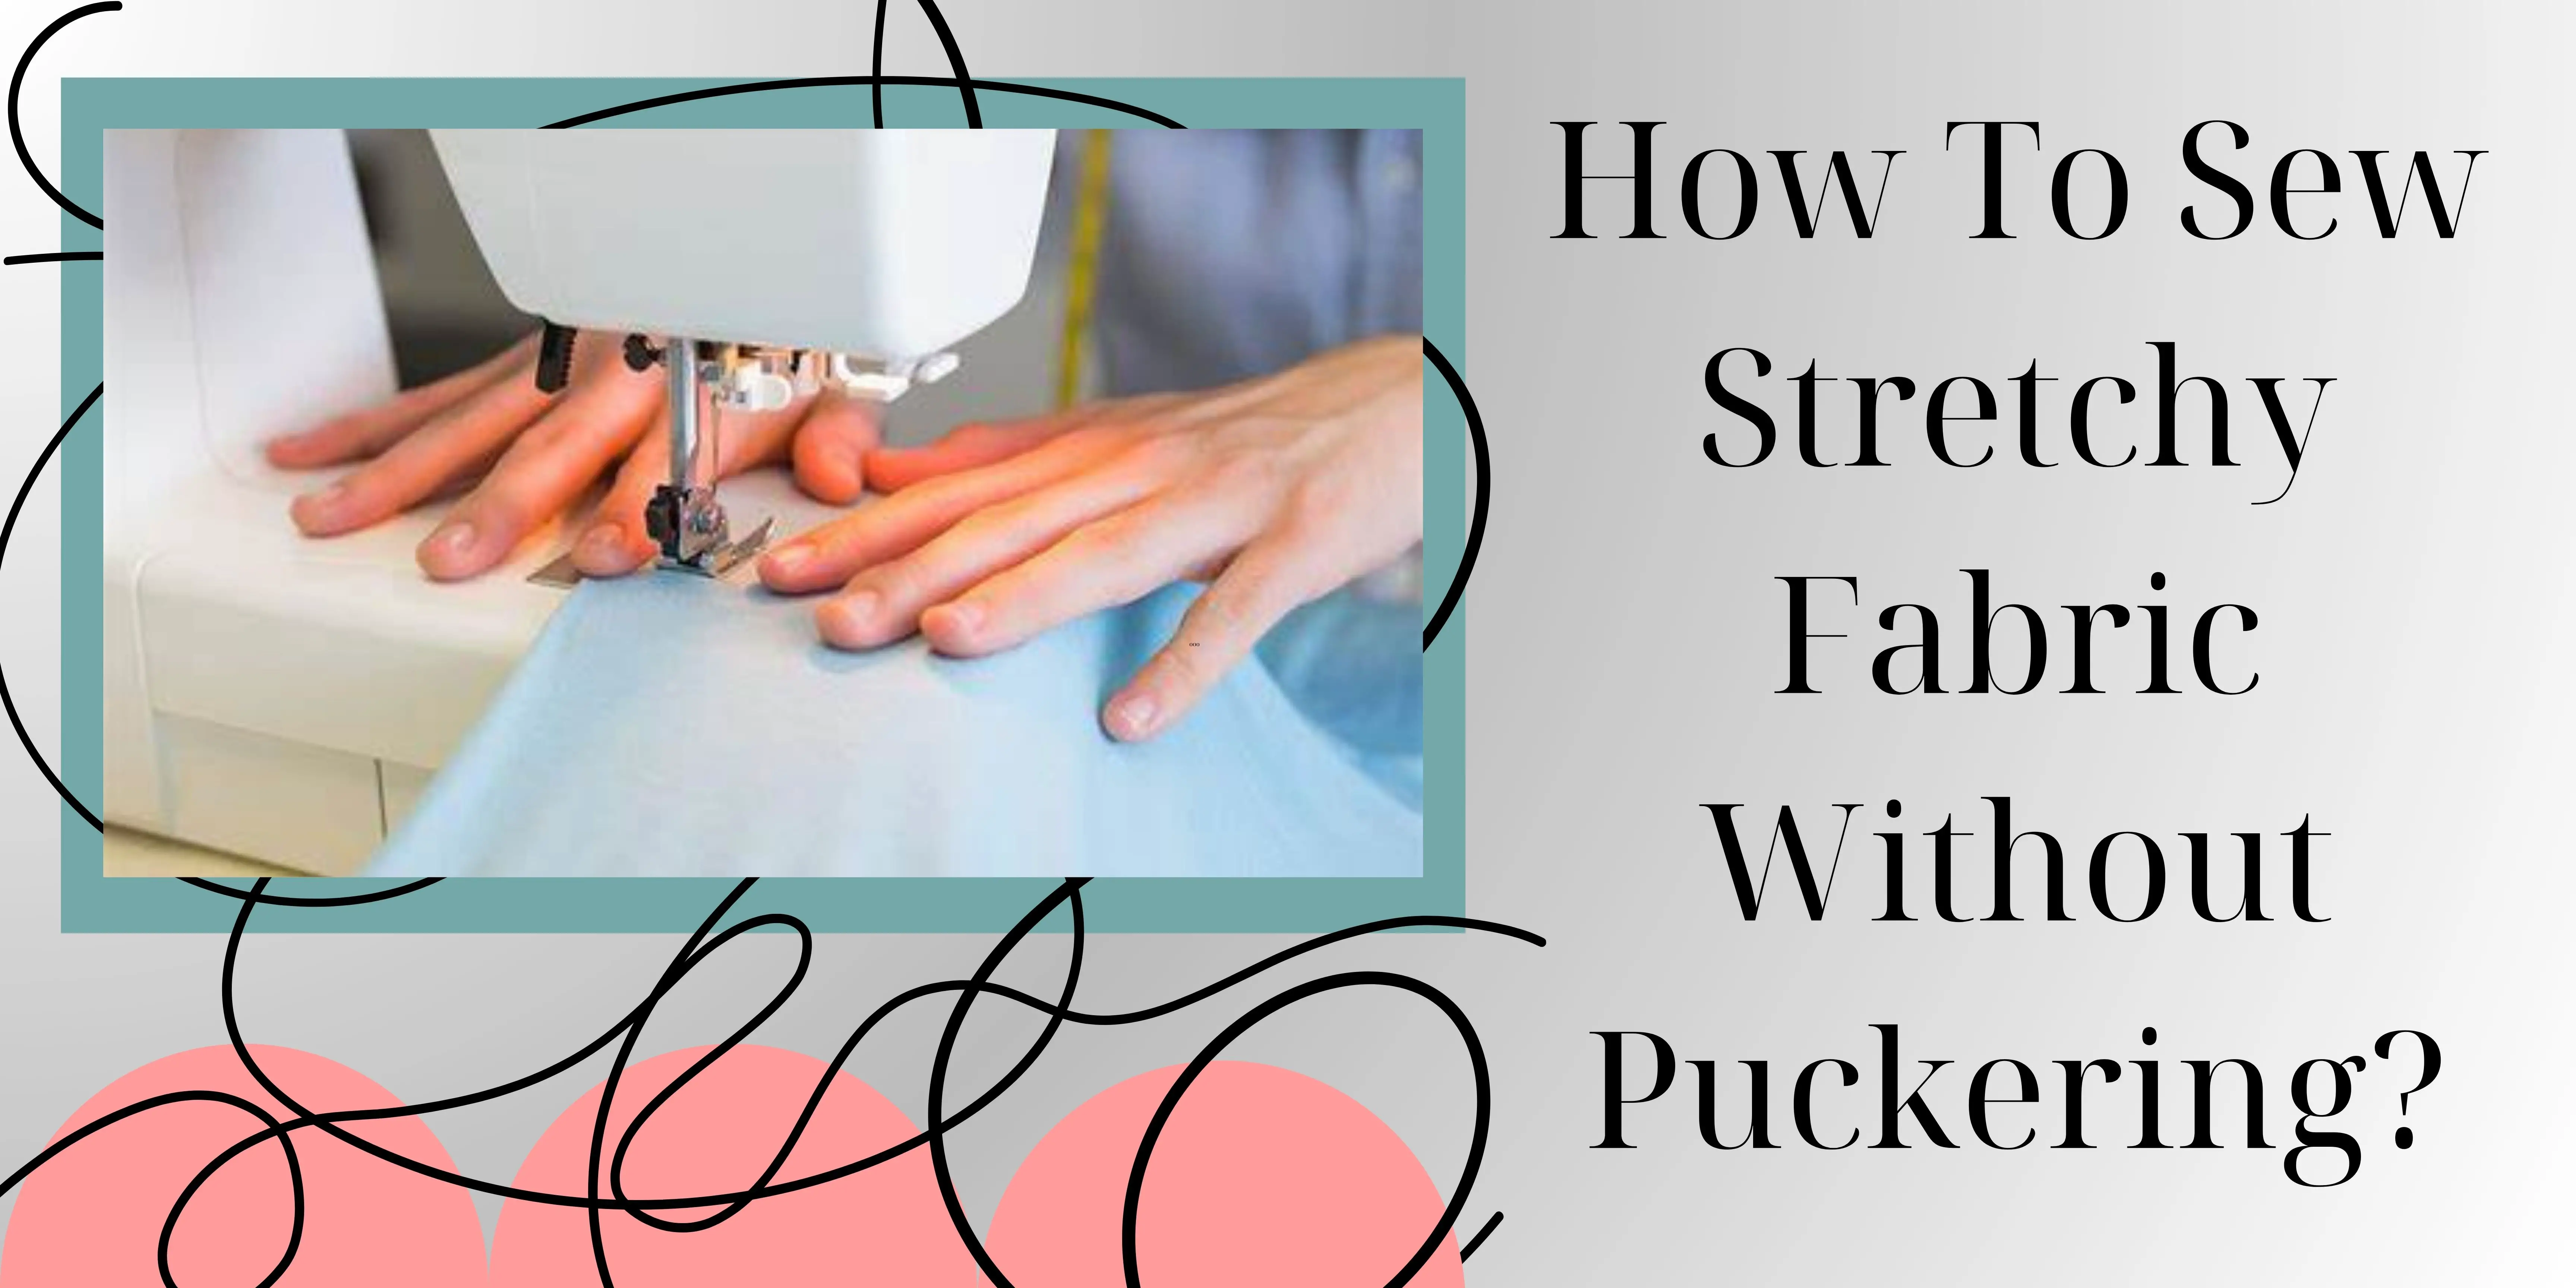 How To Sew Stretchy Fabric Without Puckering In 1 The Best Way